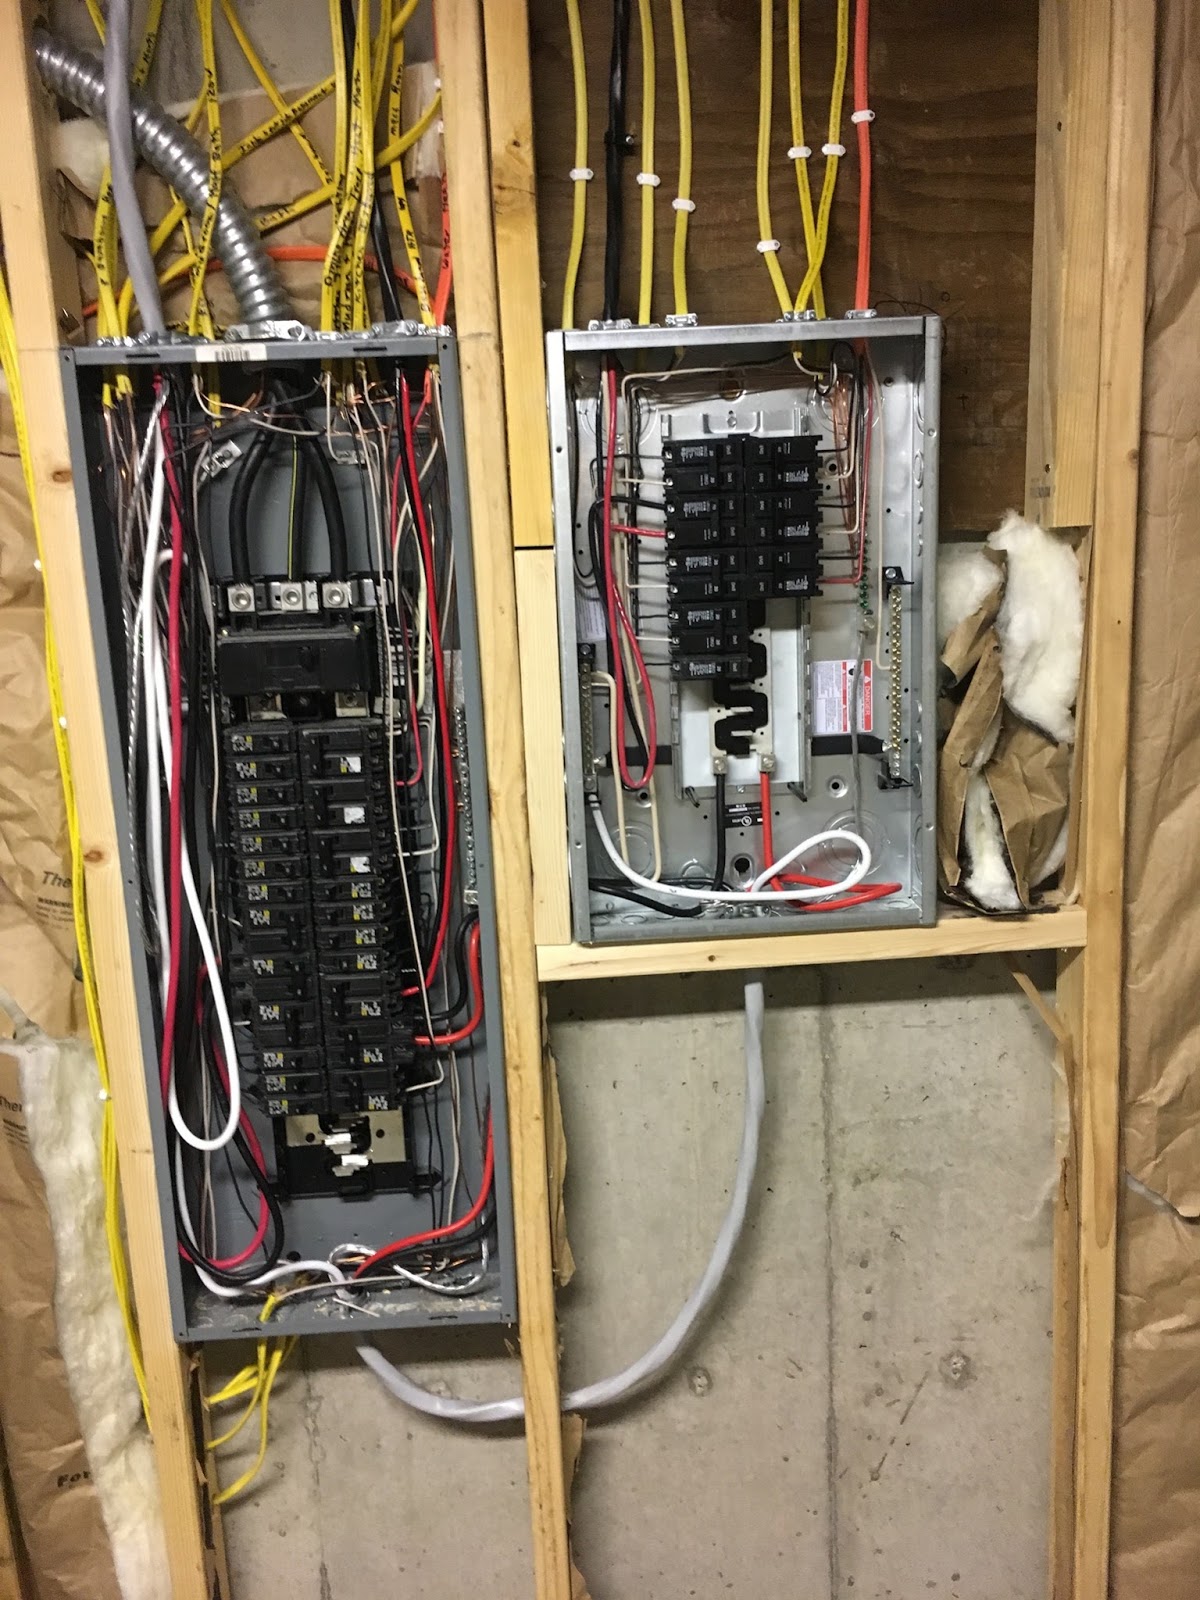 Anderson Log Cabin Fever, Log Home Building: 2017 Wiring main Panel